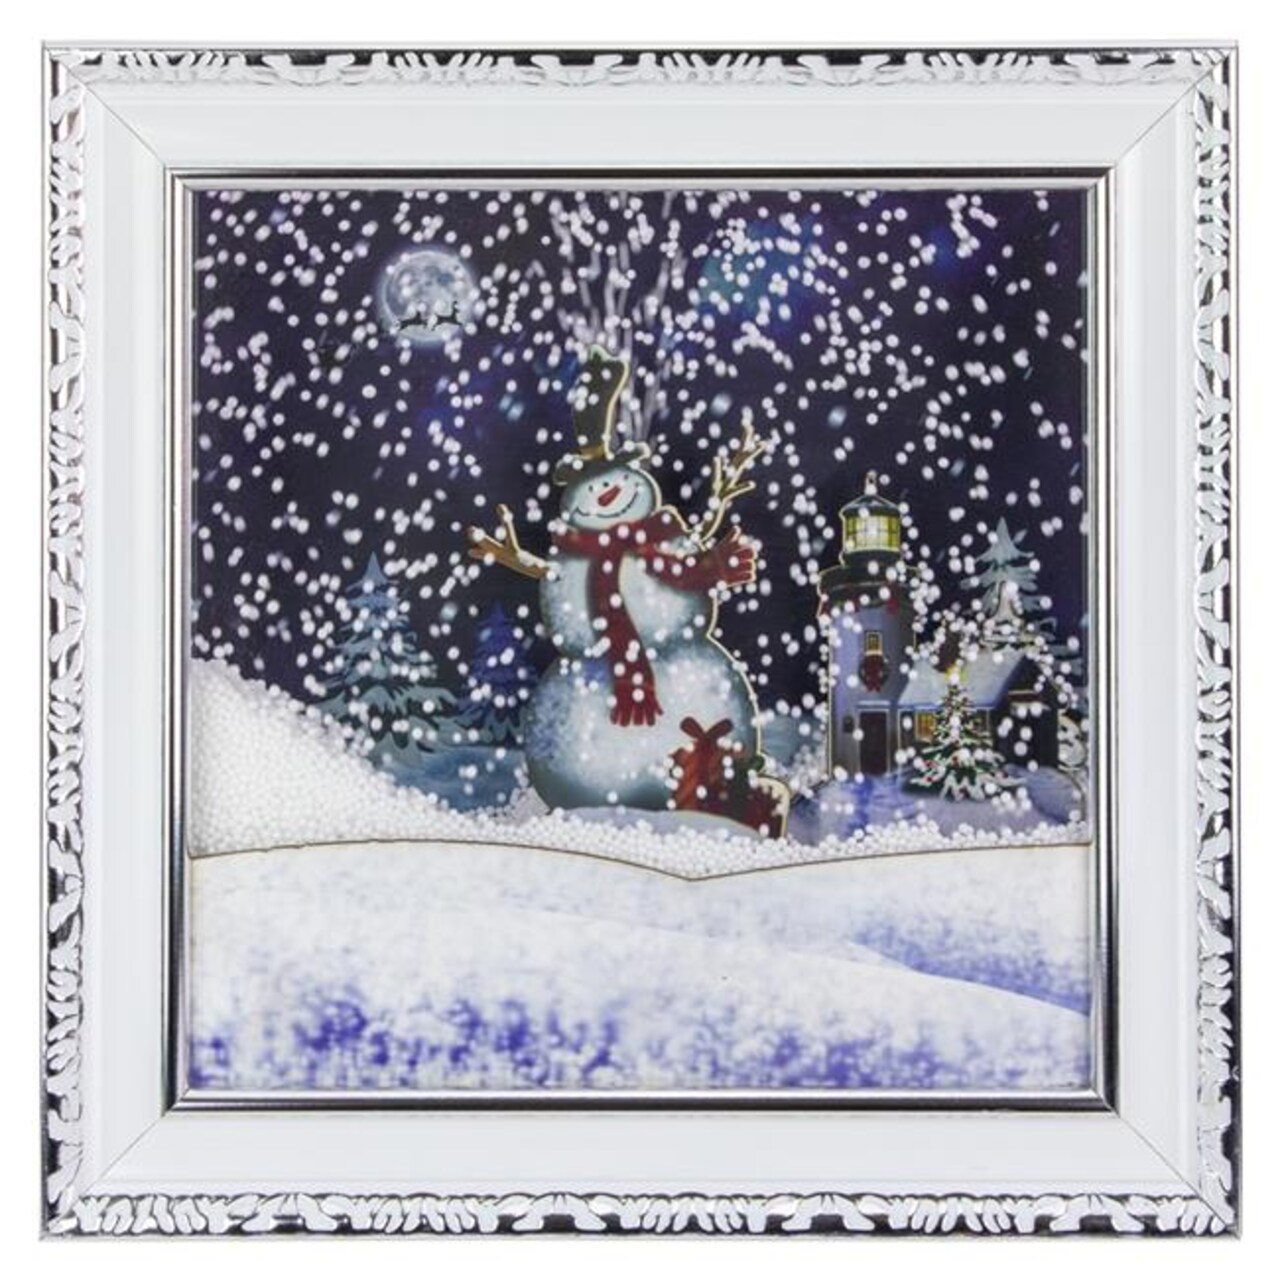 Northlight 34864994 15 in. LED Lighted Musical Snowing Snowman Wall Plaque, Pure White